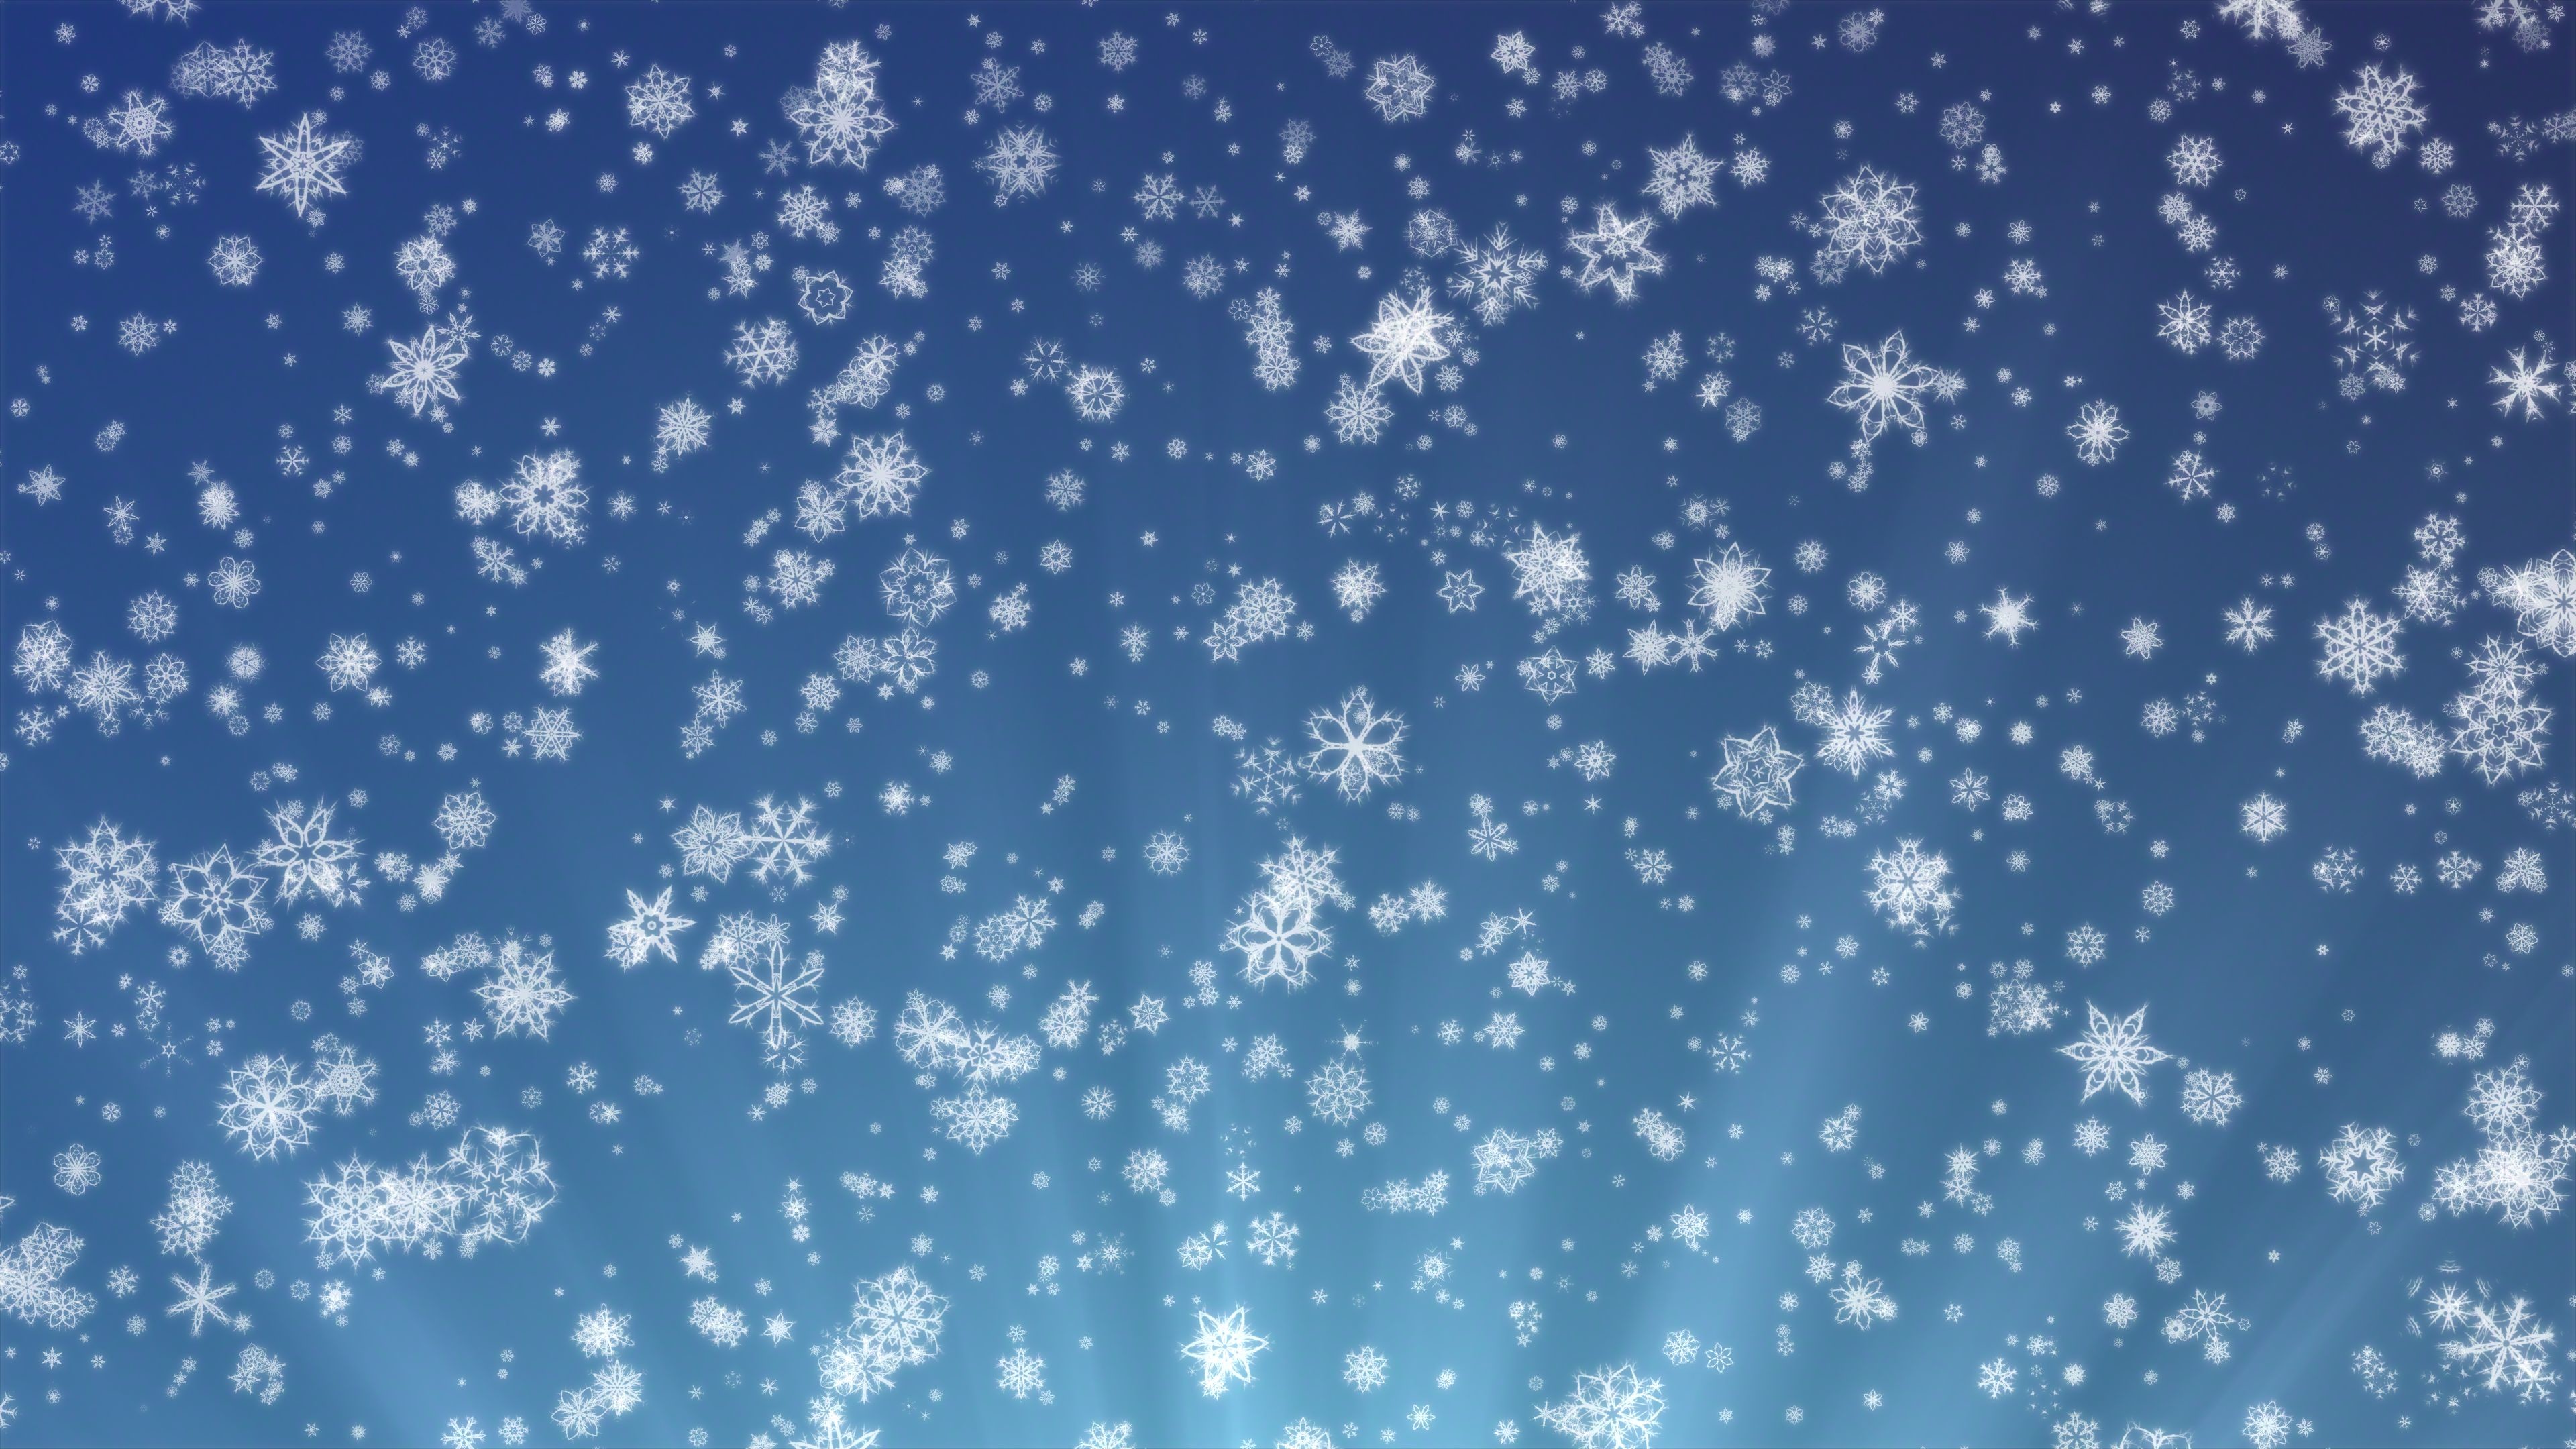 3840x2160 'Pretty Snow' - Snowflakes And Christmas Motion Background Loop-Sample2